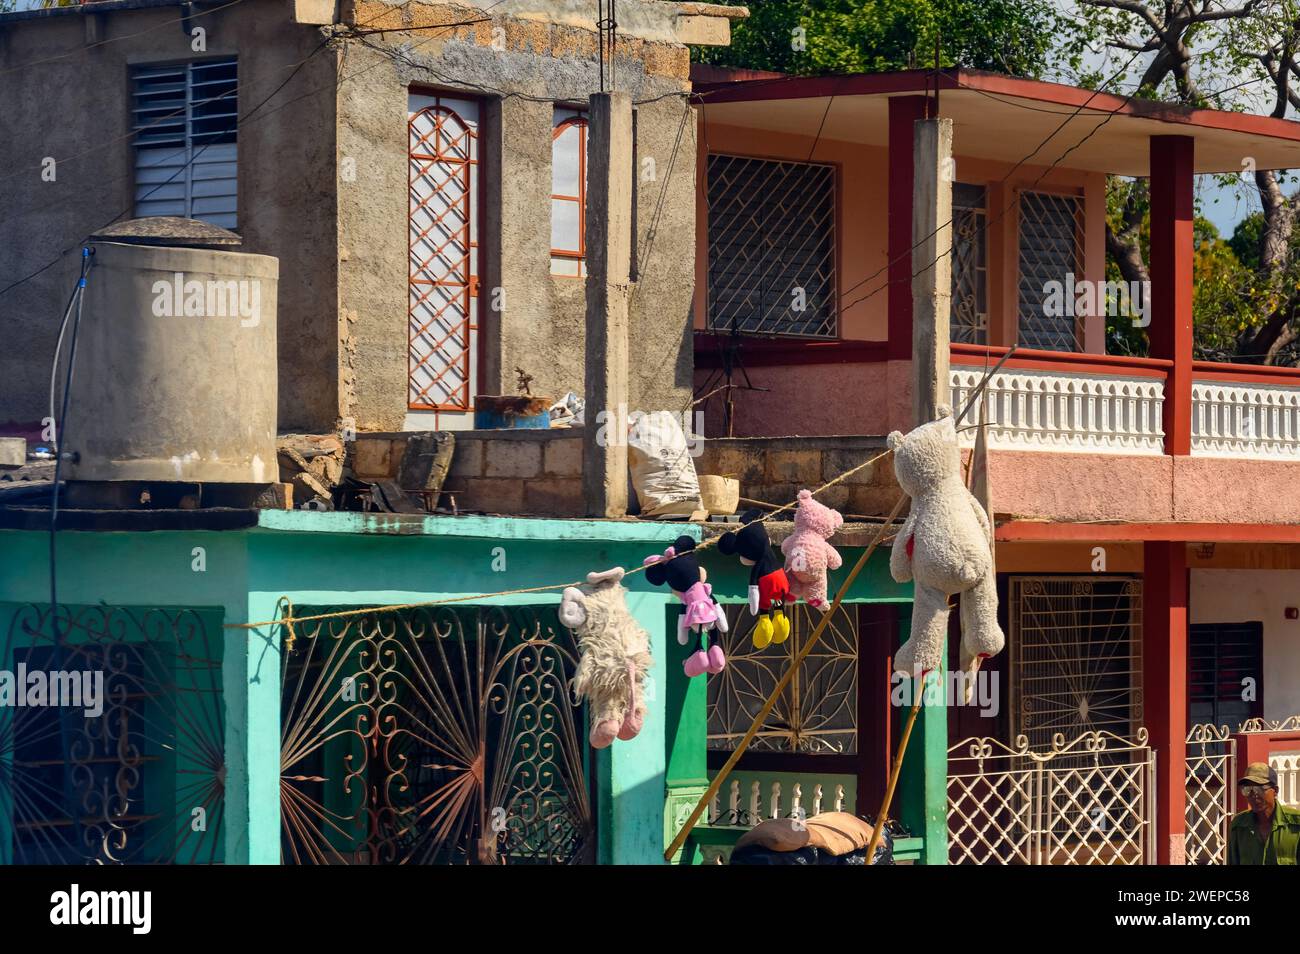 Stuffed toys drying on a clothes line, Facade of houses, Cuba Stock Photo